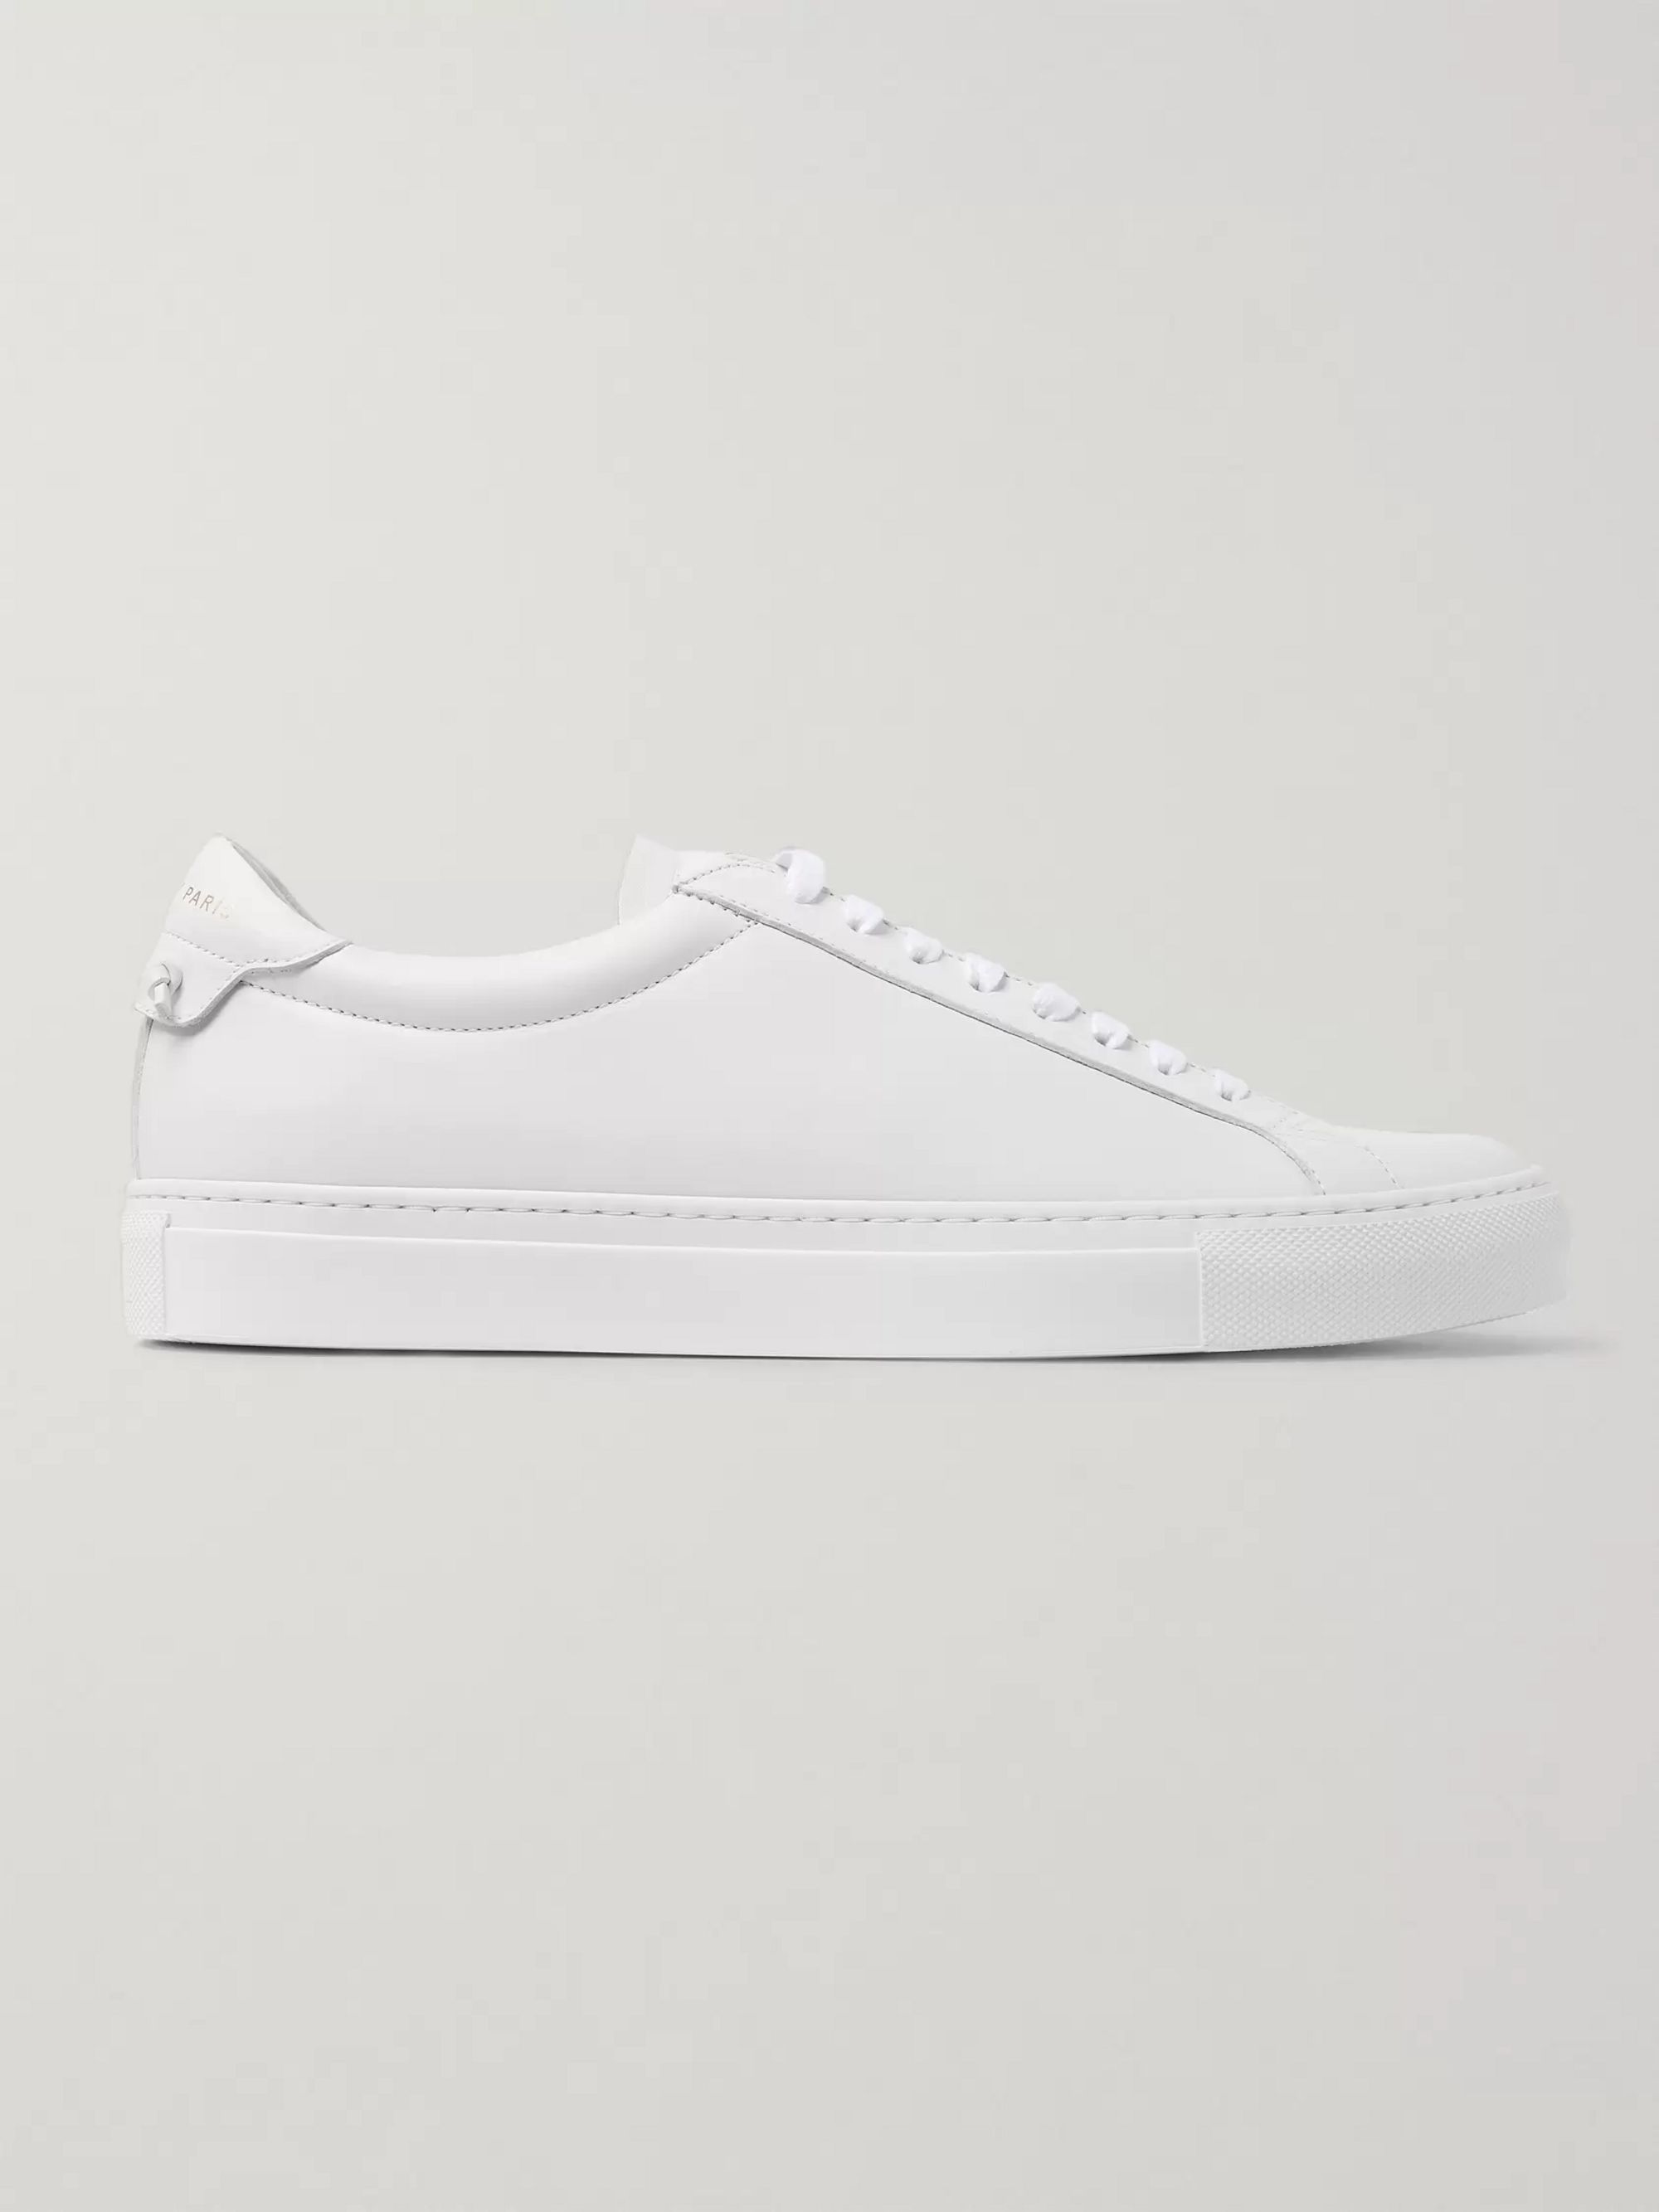 Givenchy Urban Street Low Sneakers Outlet, SAVE 50%